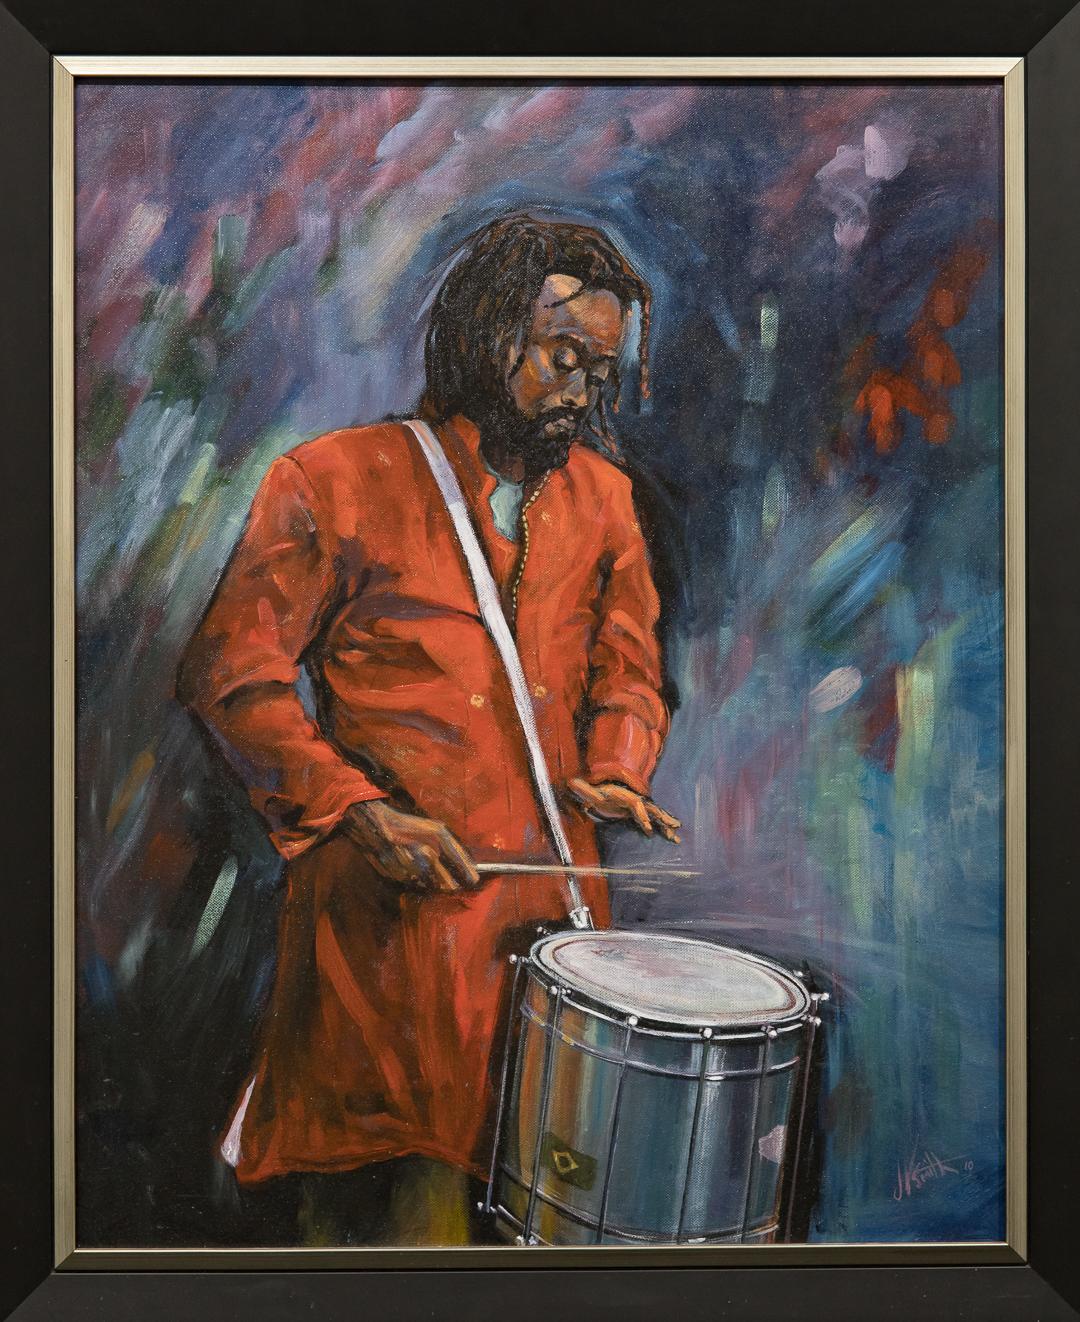 Dennis K. Smith  Figurative Painting - "Drummer in Red" Lone Figure, Male Drummer, Instrument, Colors, Acrylic